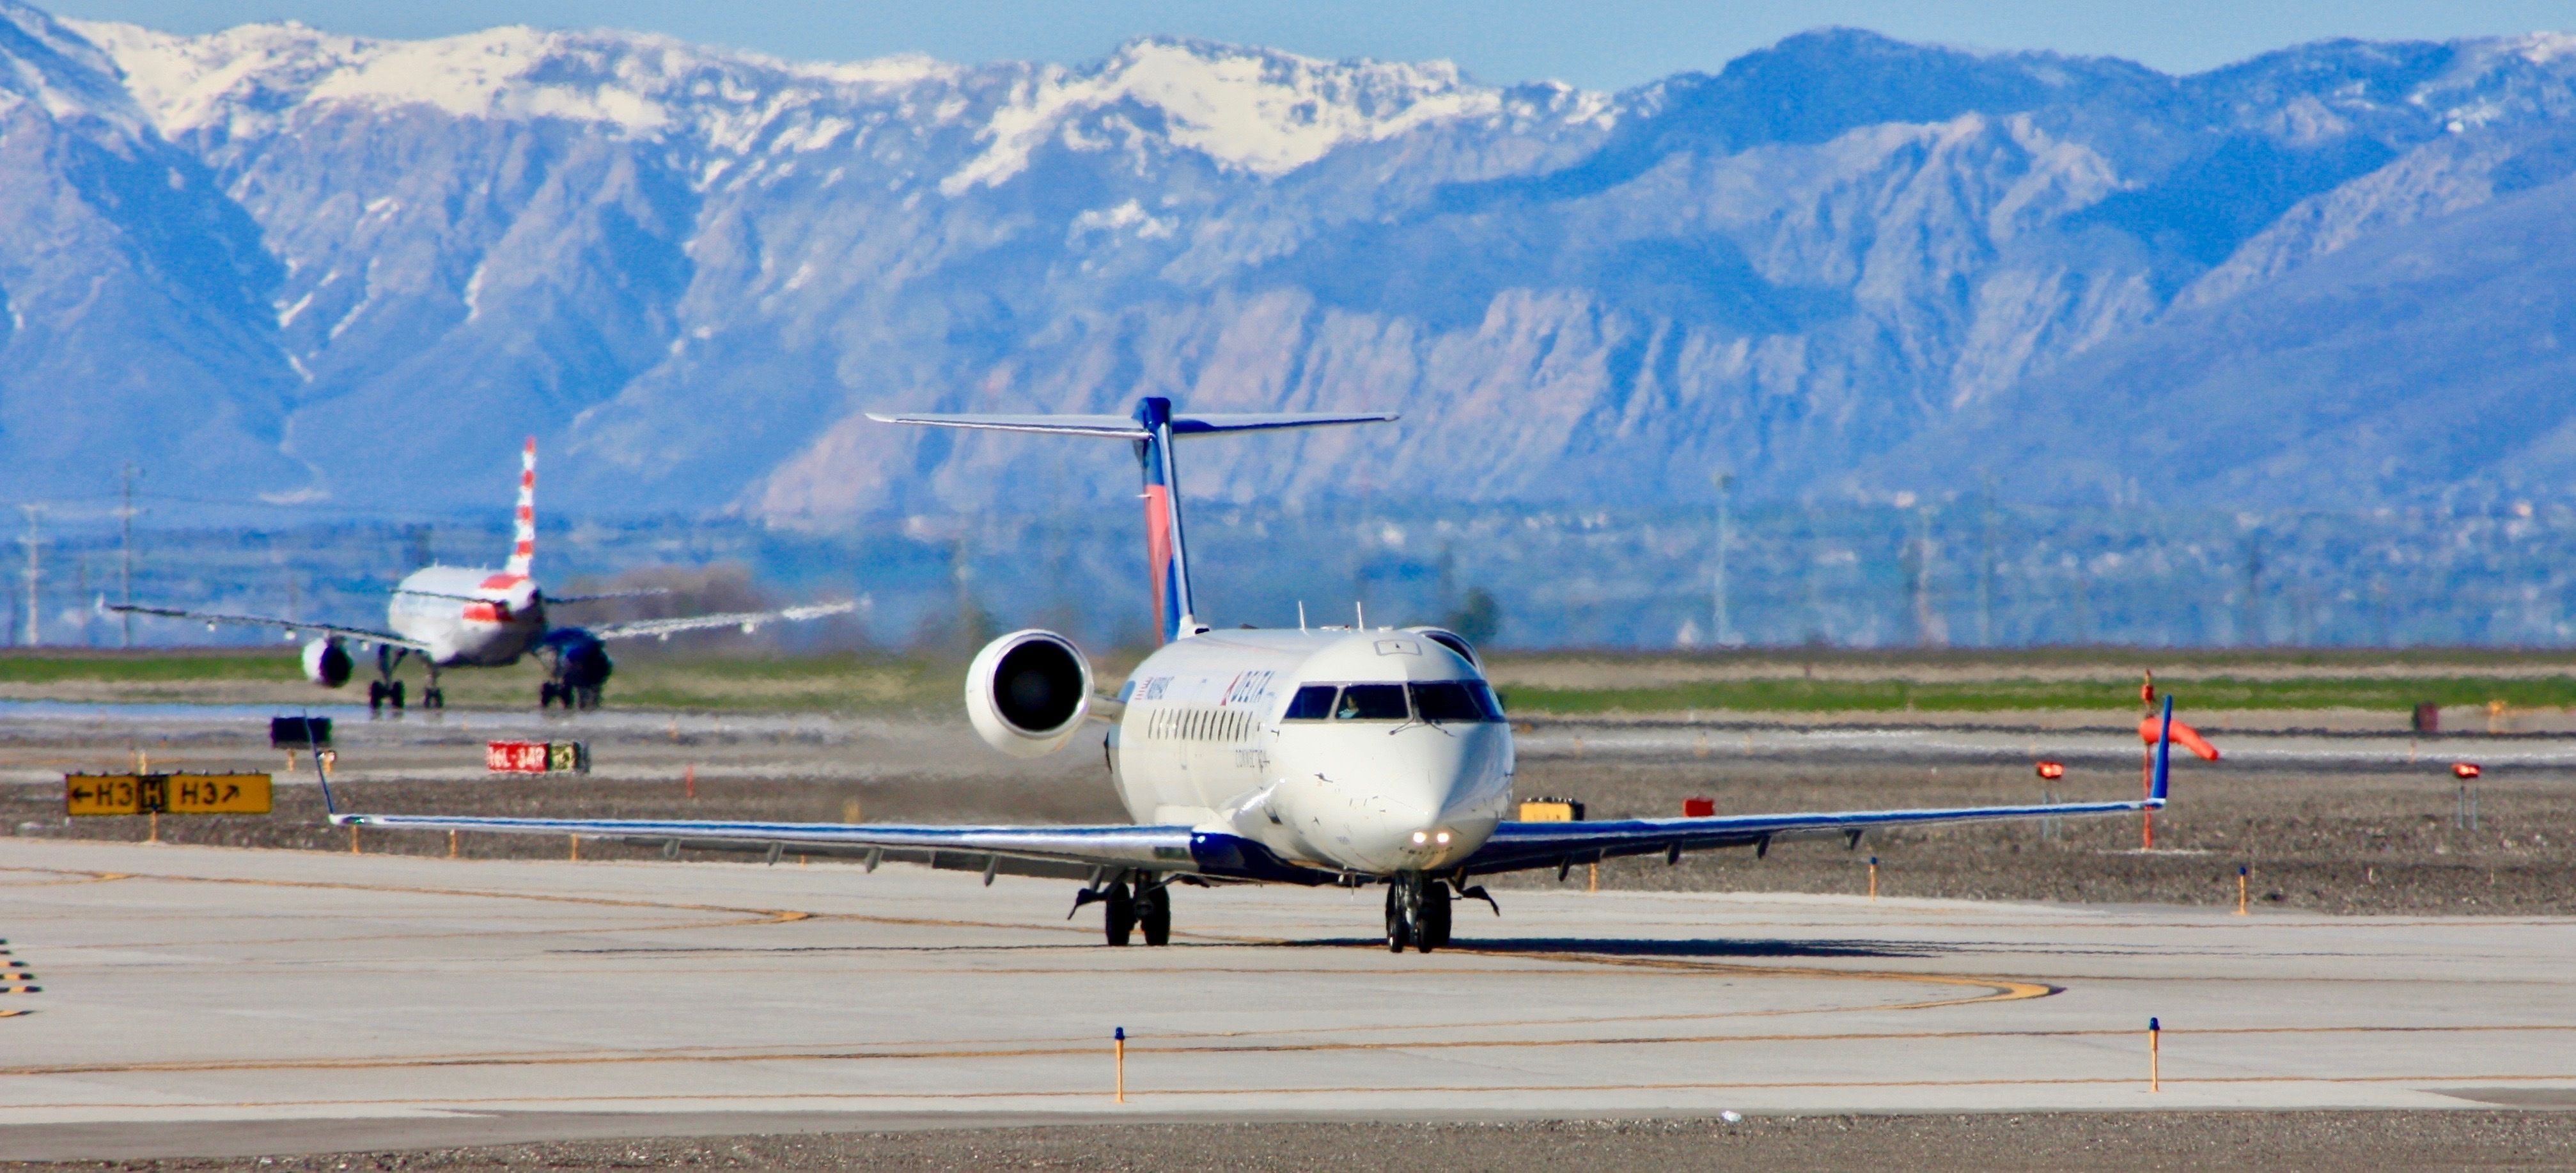 Bombardier CRJ-200 taxies to the runway for departure at Salt Lake City International Airport